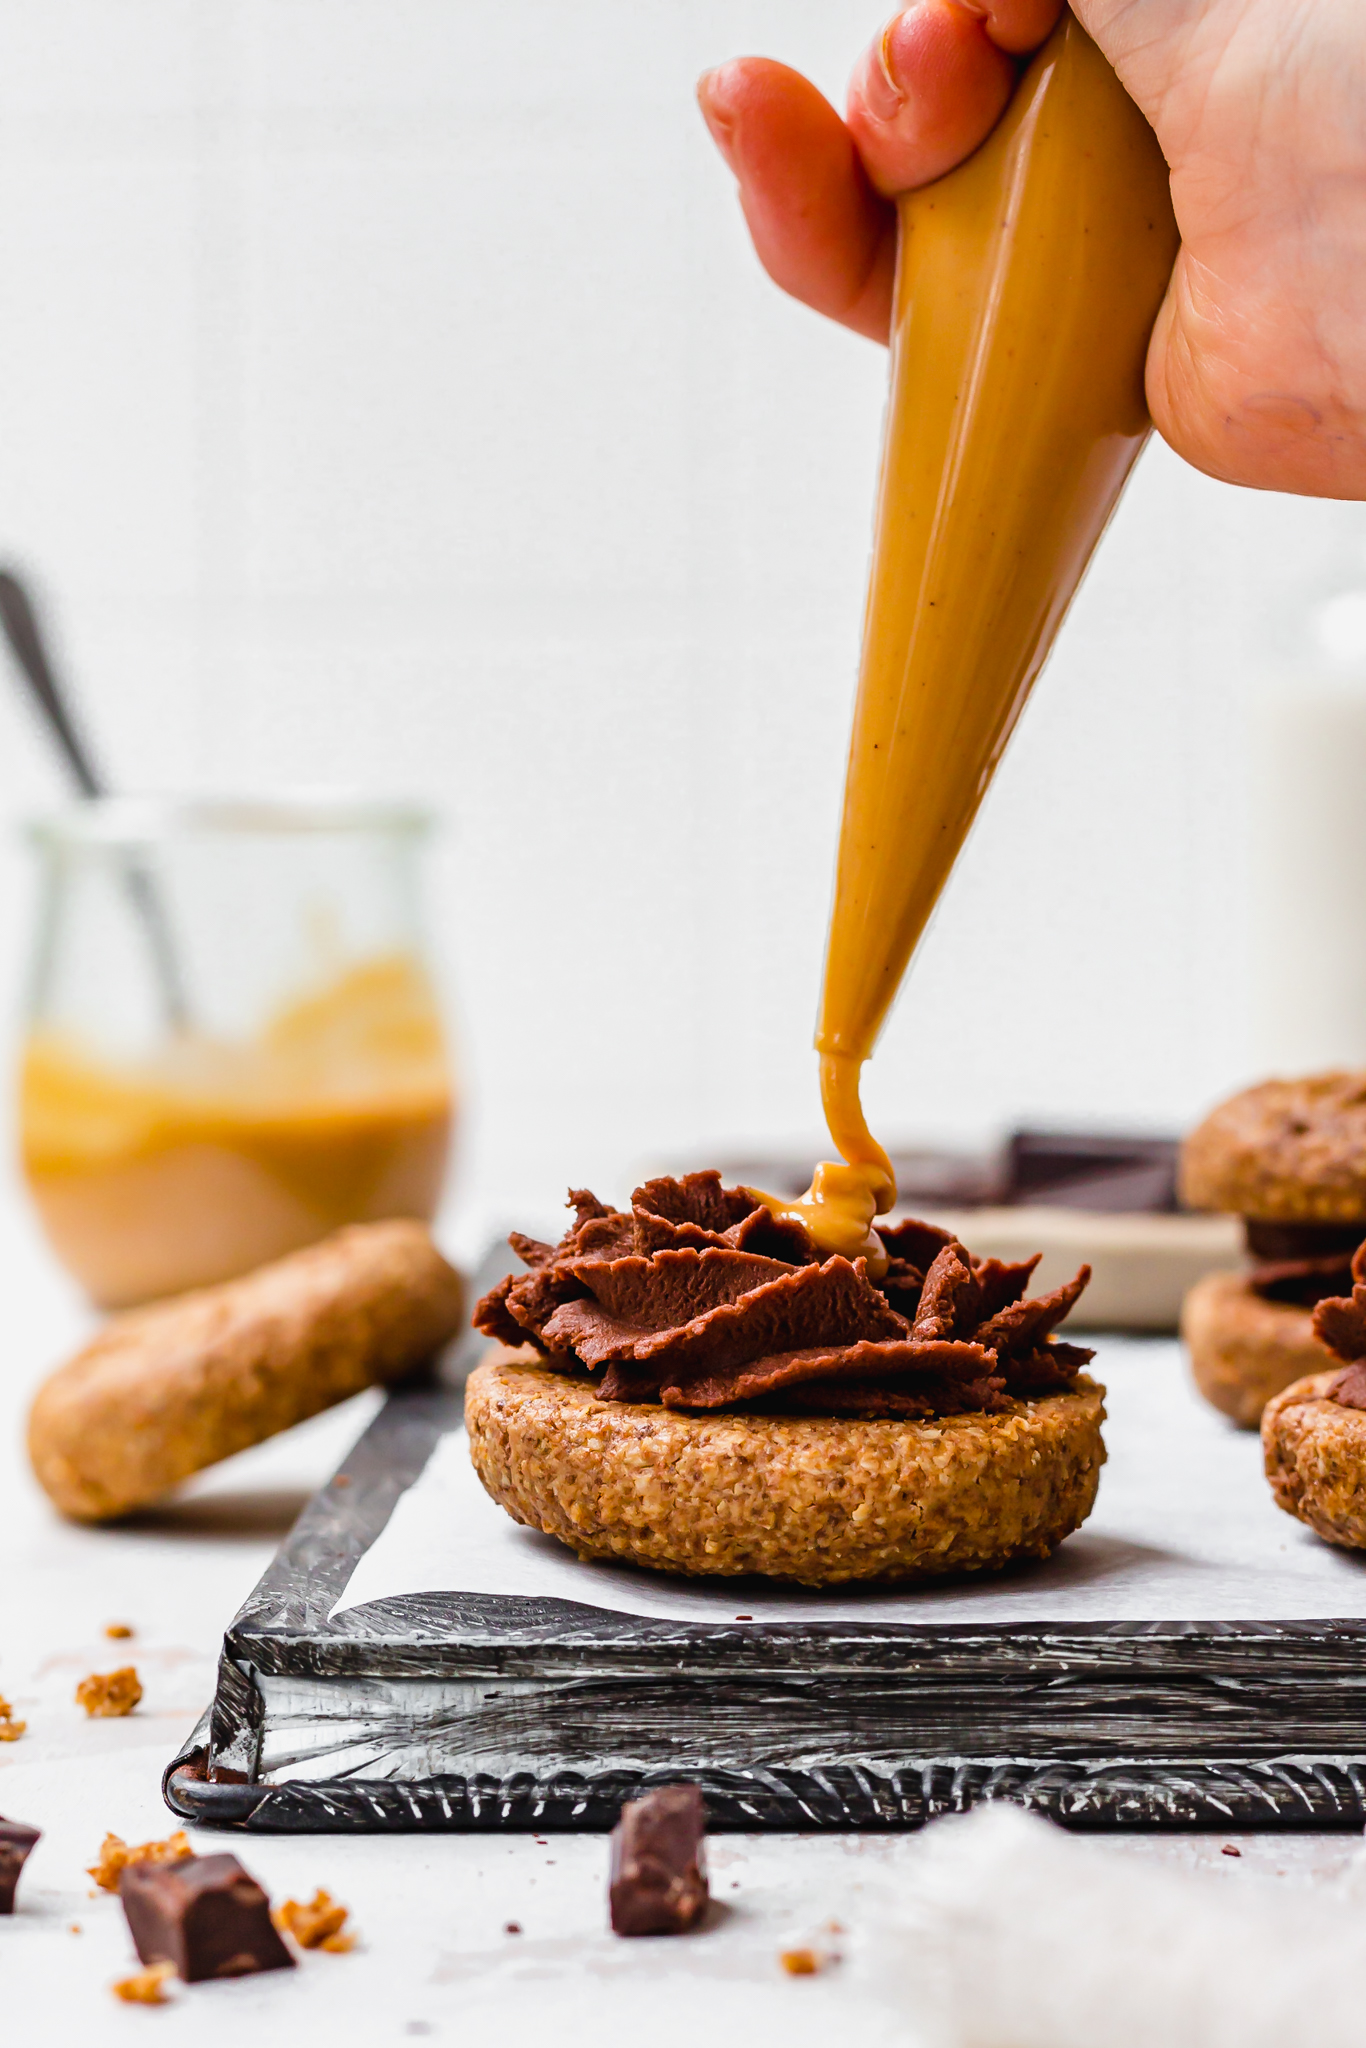 Piping peanut butter into Chocolate Filled Peanut Butter Cookie Sandwiches